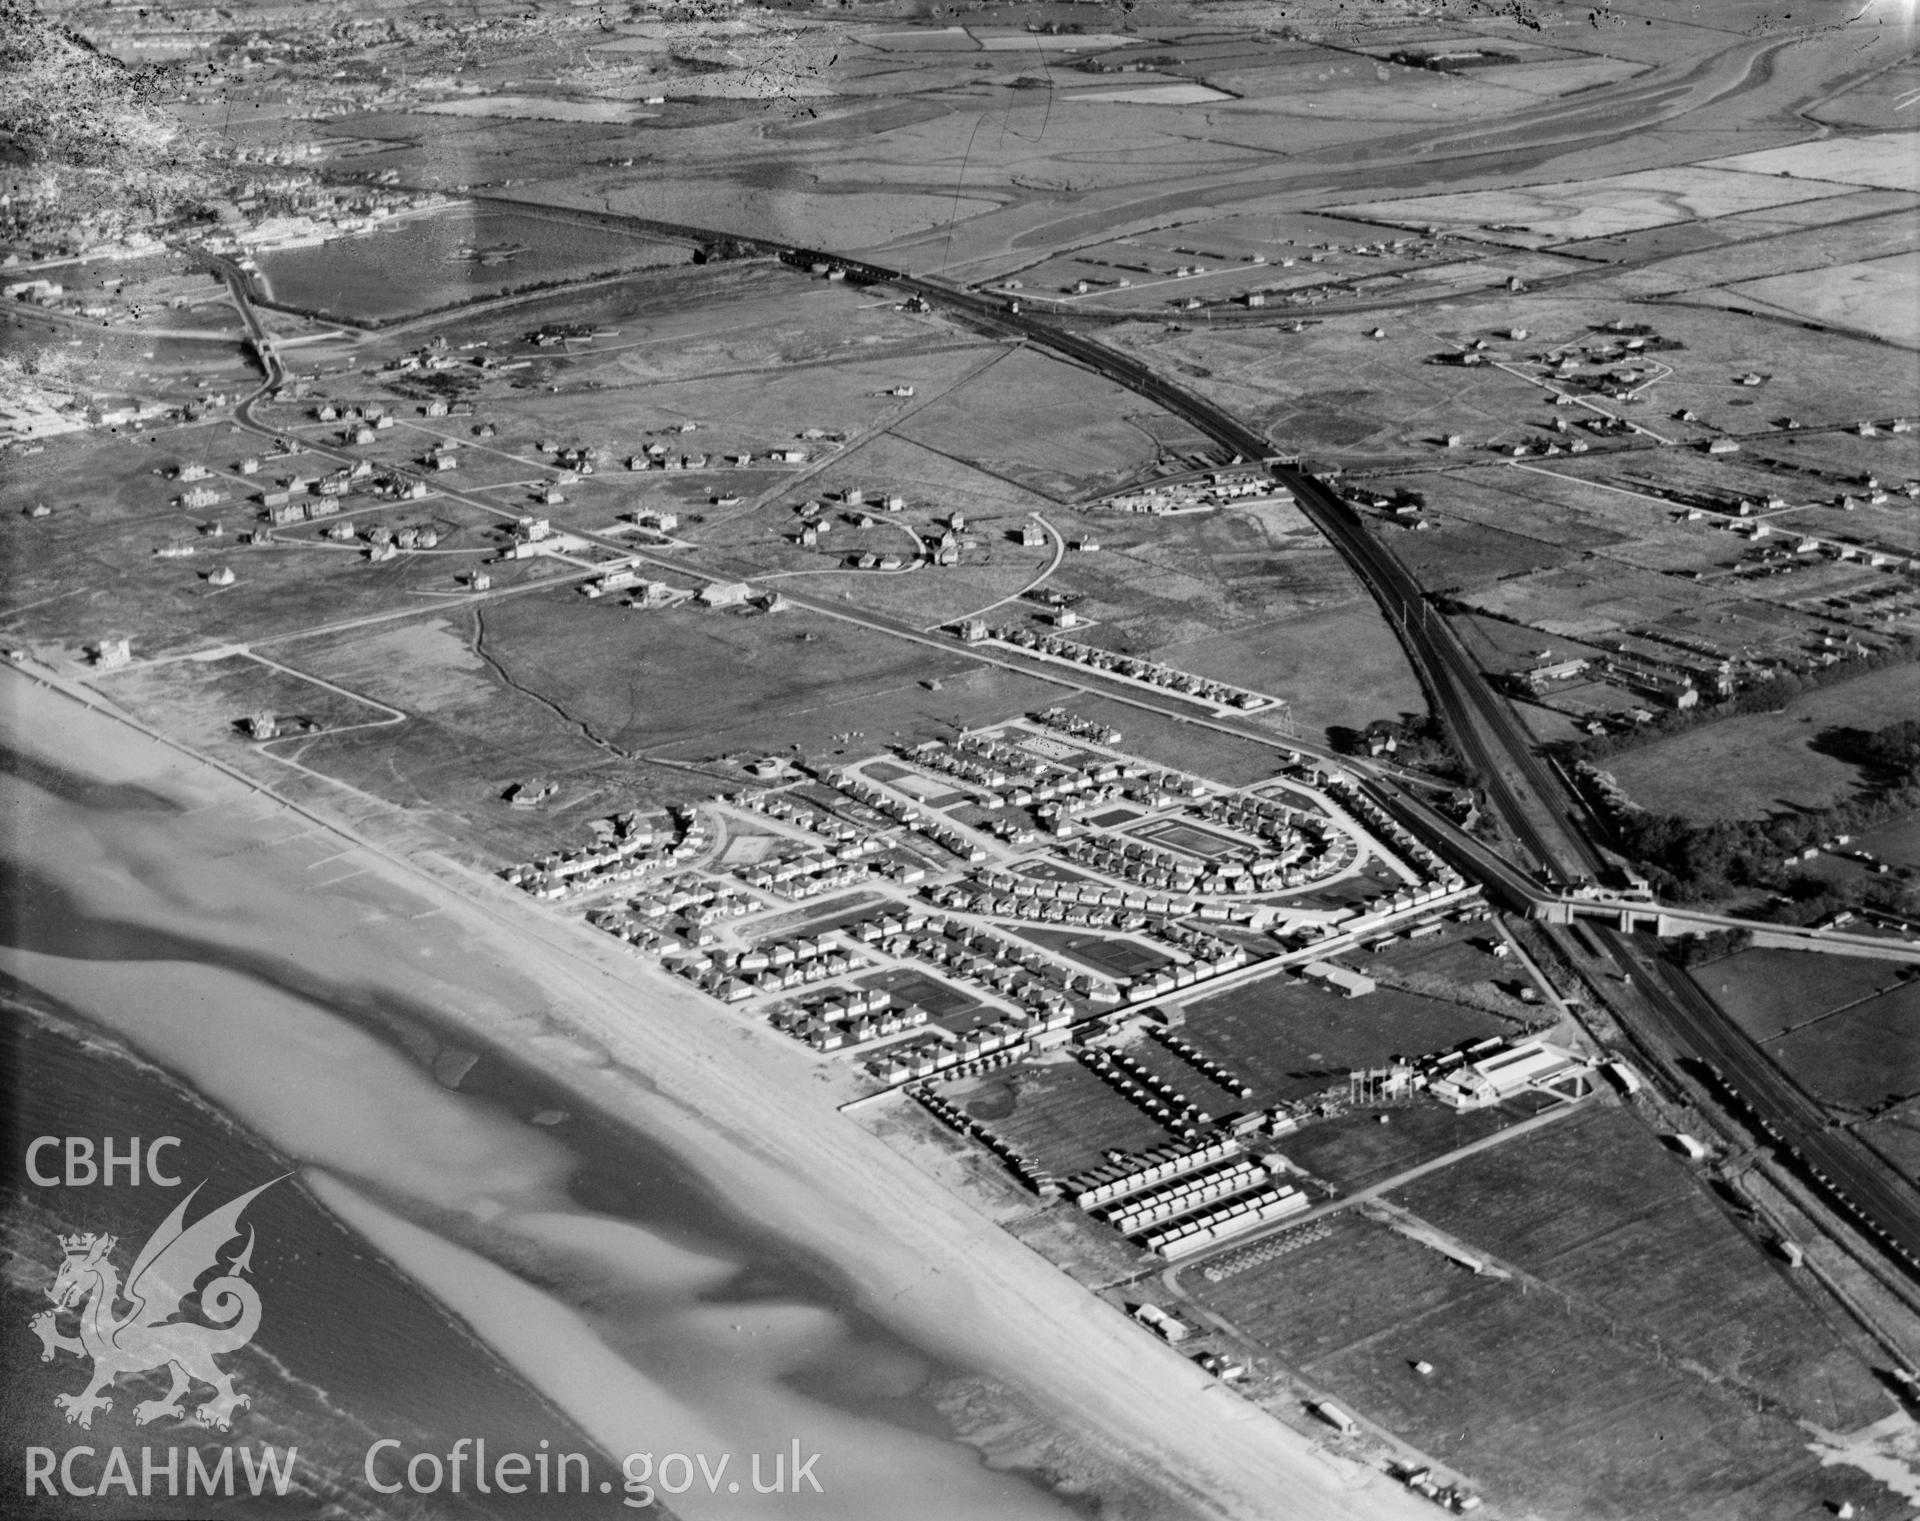 View of the Kinmel Bay area of Rhyl showing holiday camp, oblique aerial view. 5?x4? black and white glass plate negative.